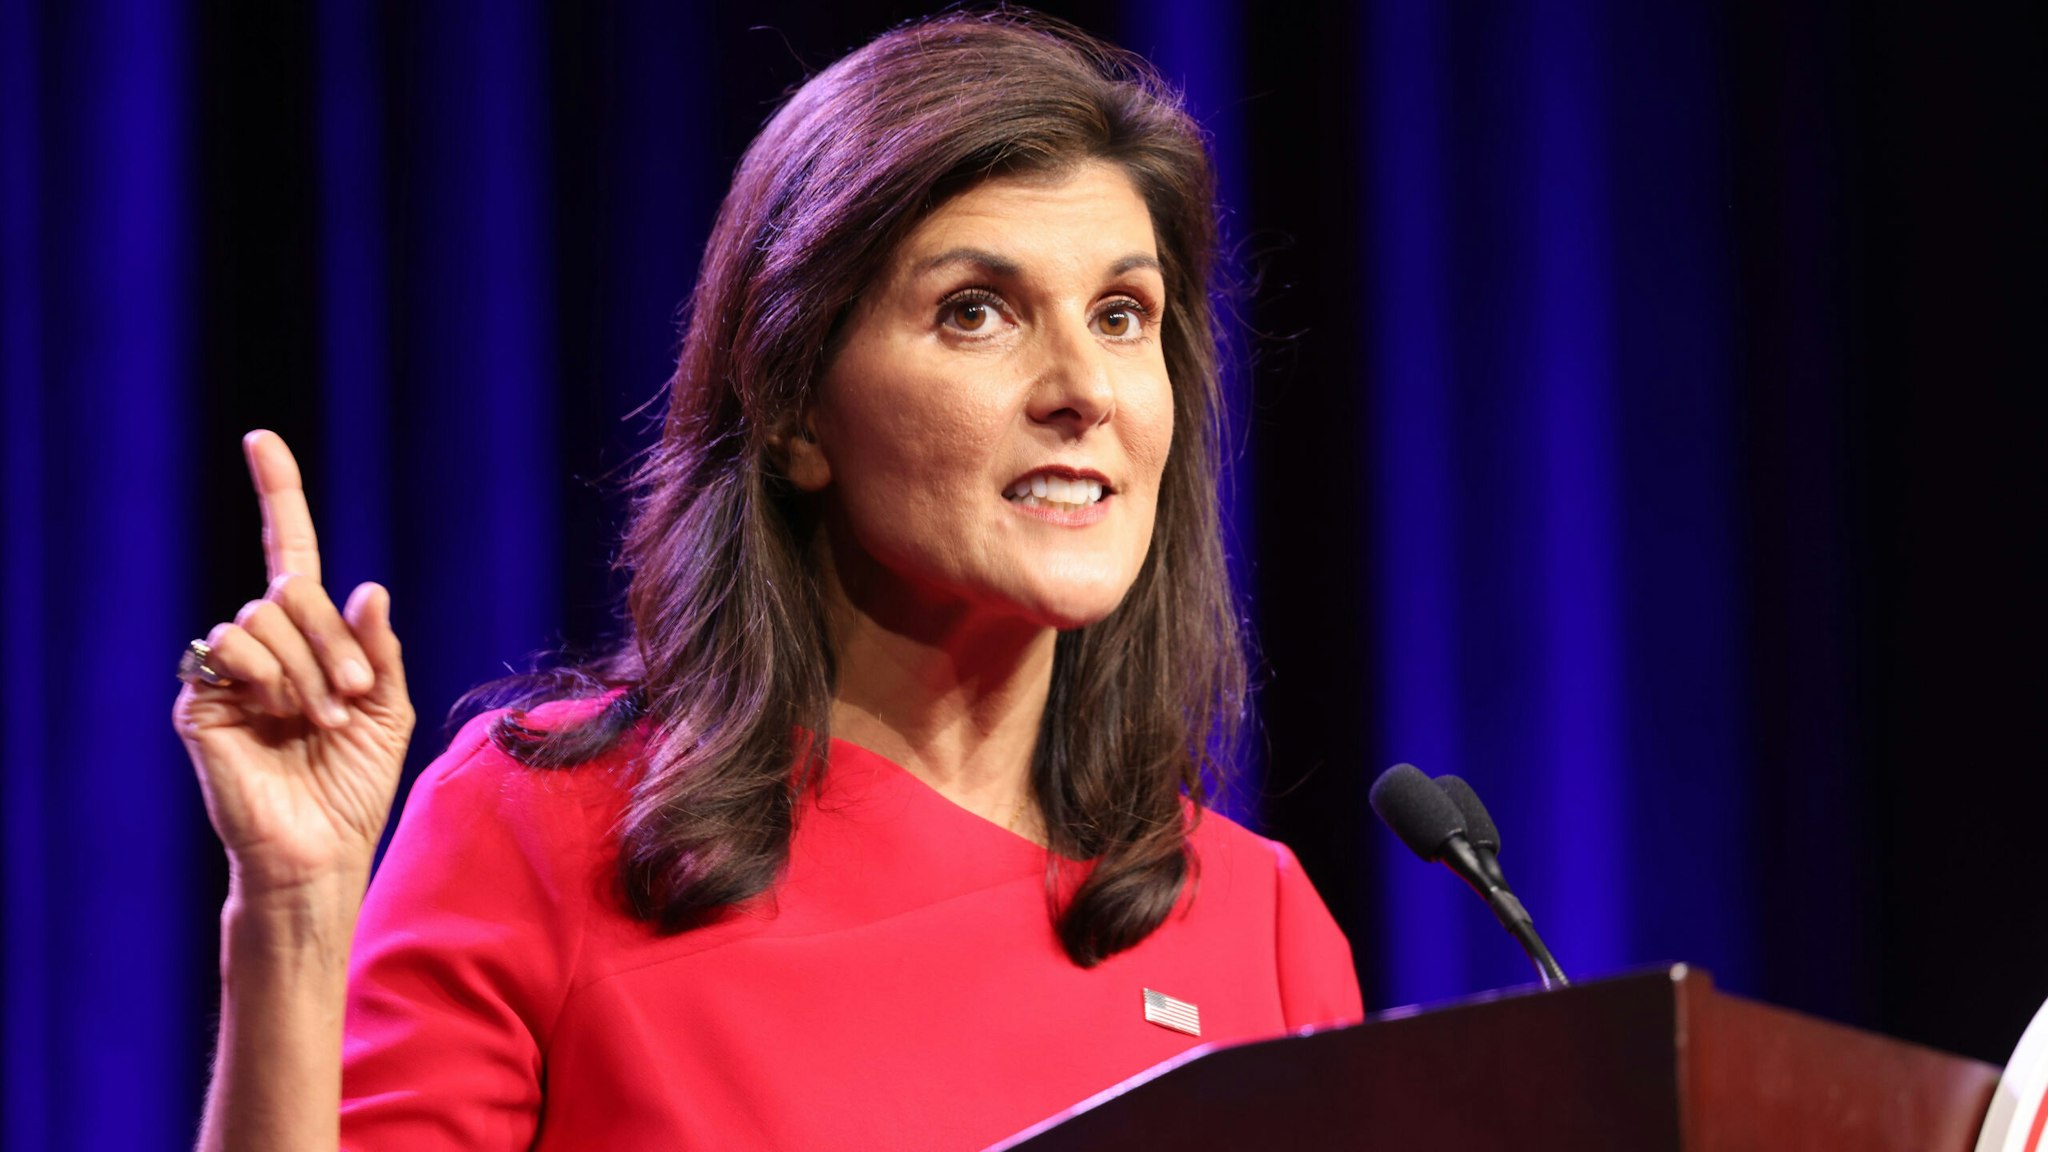 Nikki Haley, former ambassador to the United Nations, gestures as she speaks at the Republican Party Of Iowa's annual Lincoln Dinner in Des Moines, Iowa, US, on Friday, July 28, 2023. The dinner, a showcase event for Iowa Republicans, is a staple gathering for Republican presidential candidates with all eyes on Donald Trump and Ron DeSantis who are well ahead of the pack in polls but arrive facing unique challenges.